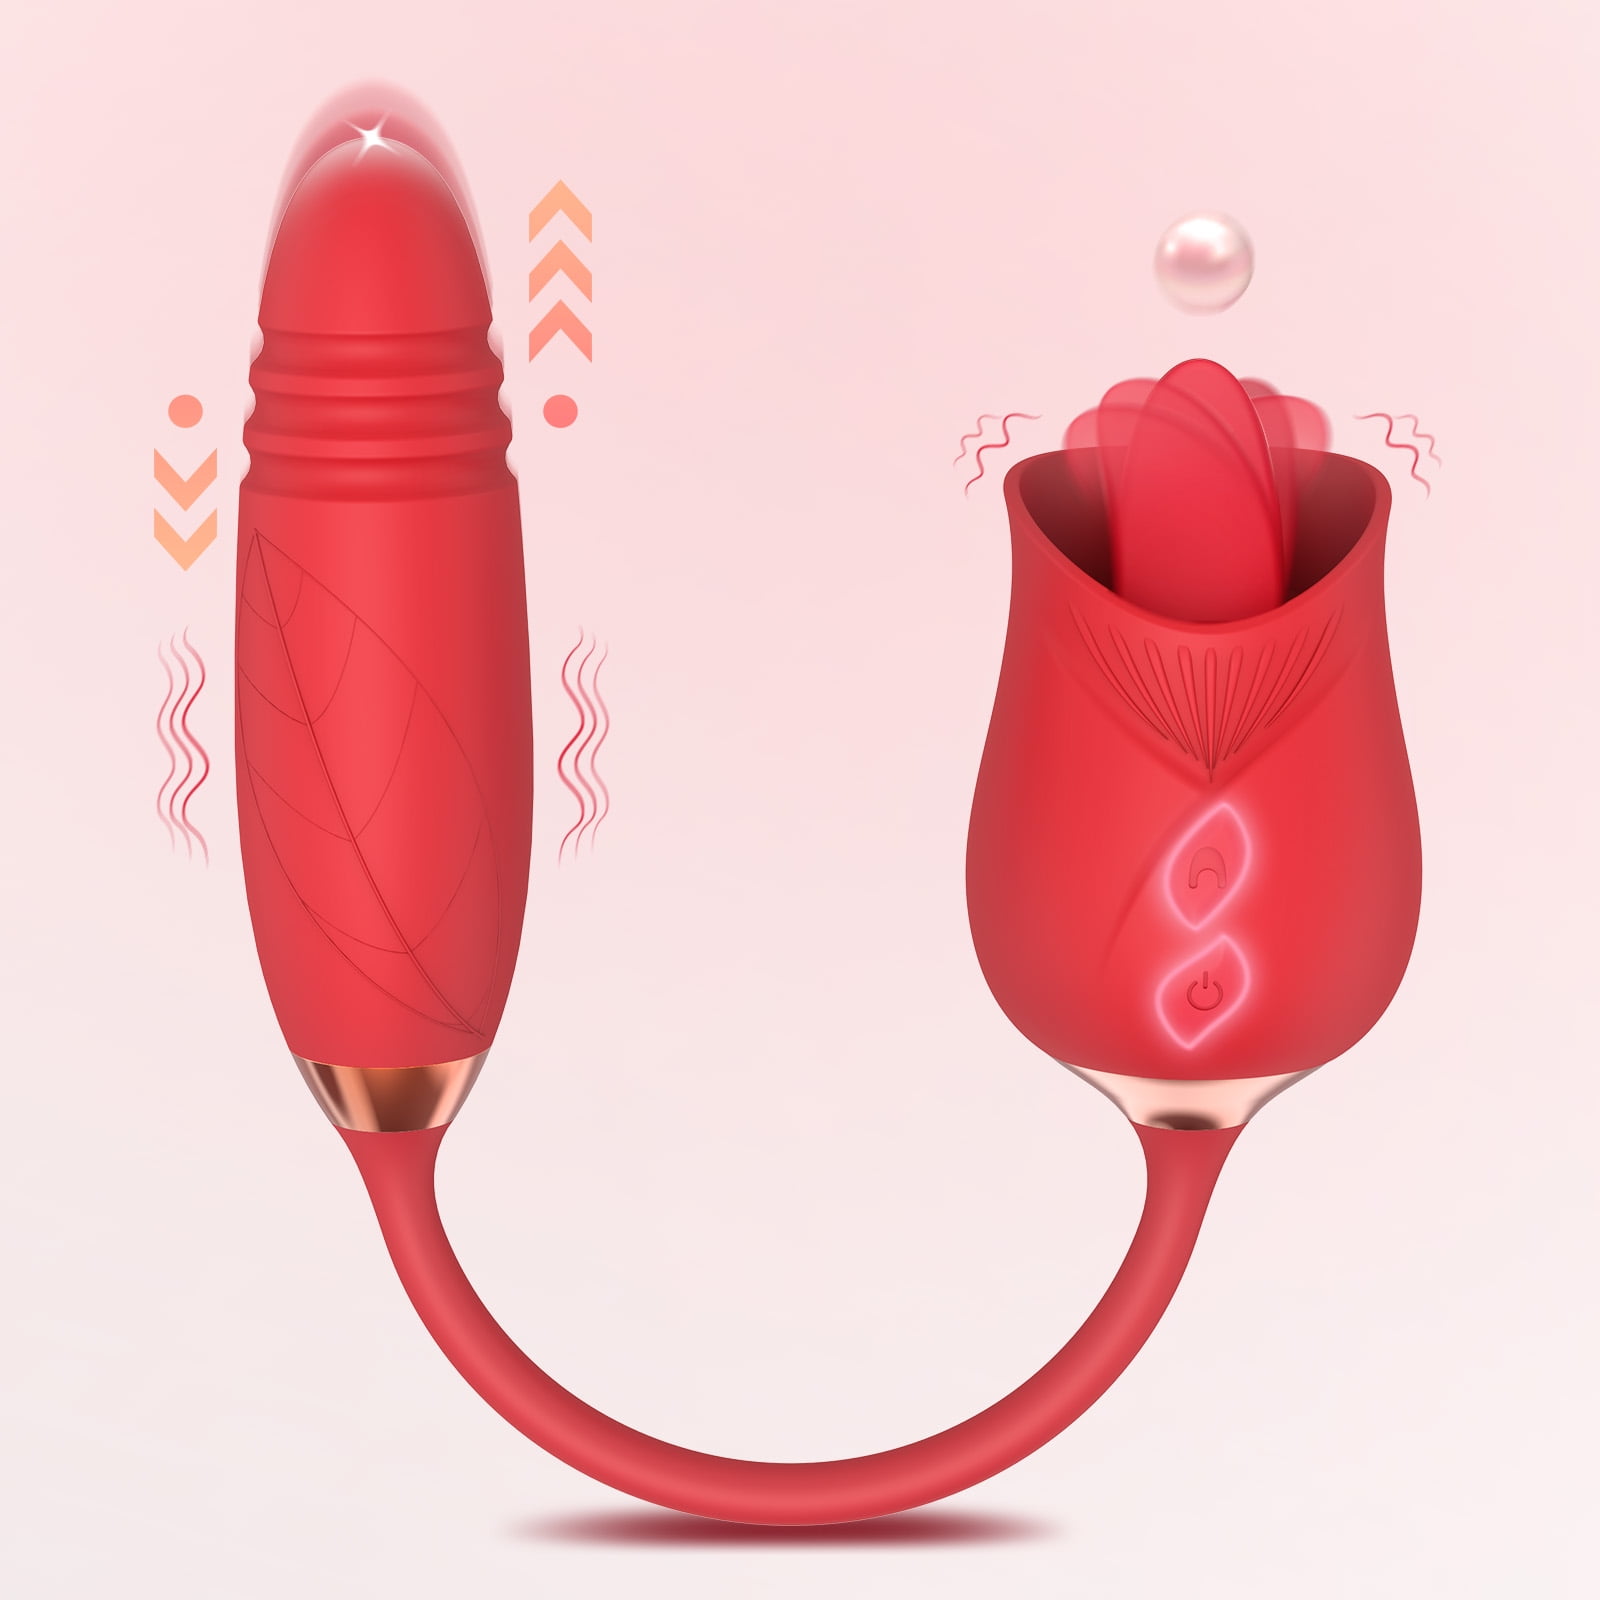 Rose Sex Toys for Women - 2 in 1 Adult Rose Sex Stimulator Vibrator Dildo for Nipple G Spot, Butt Plug for Woman Couples Pleasure(Red) pic photo